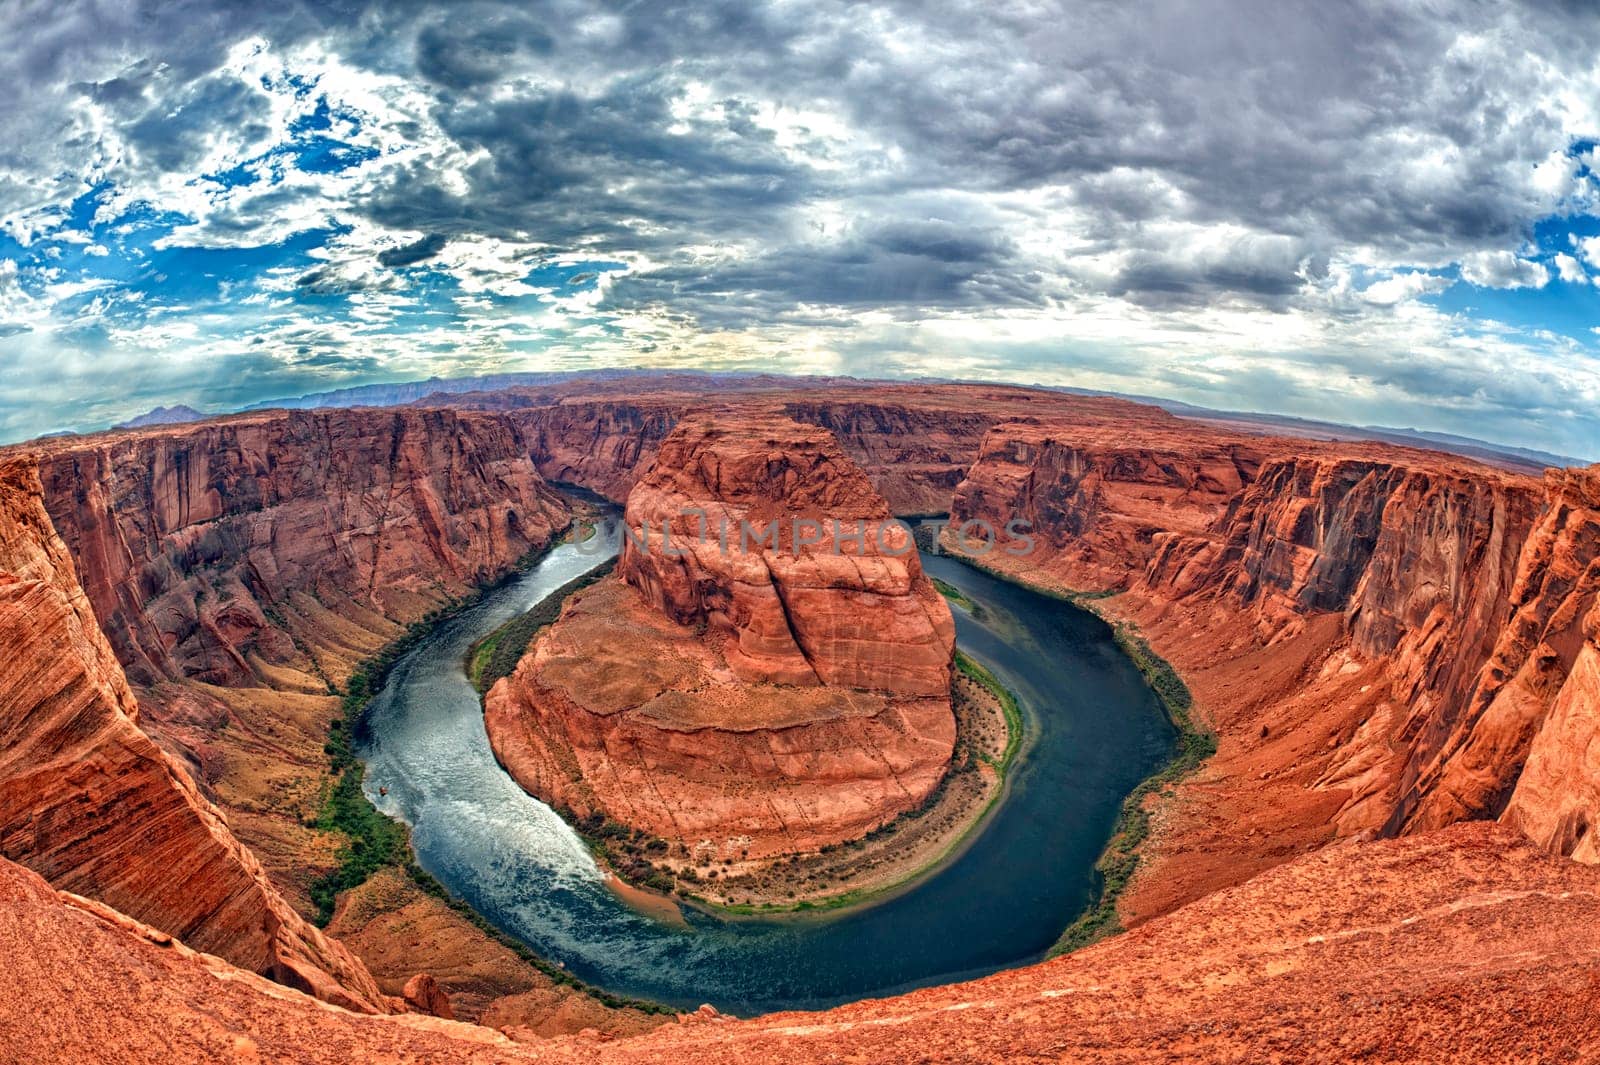 horseshoe bend colorado river view by AndreaIzzotti